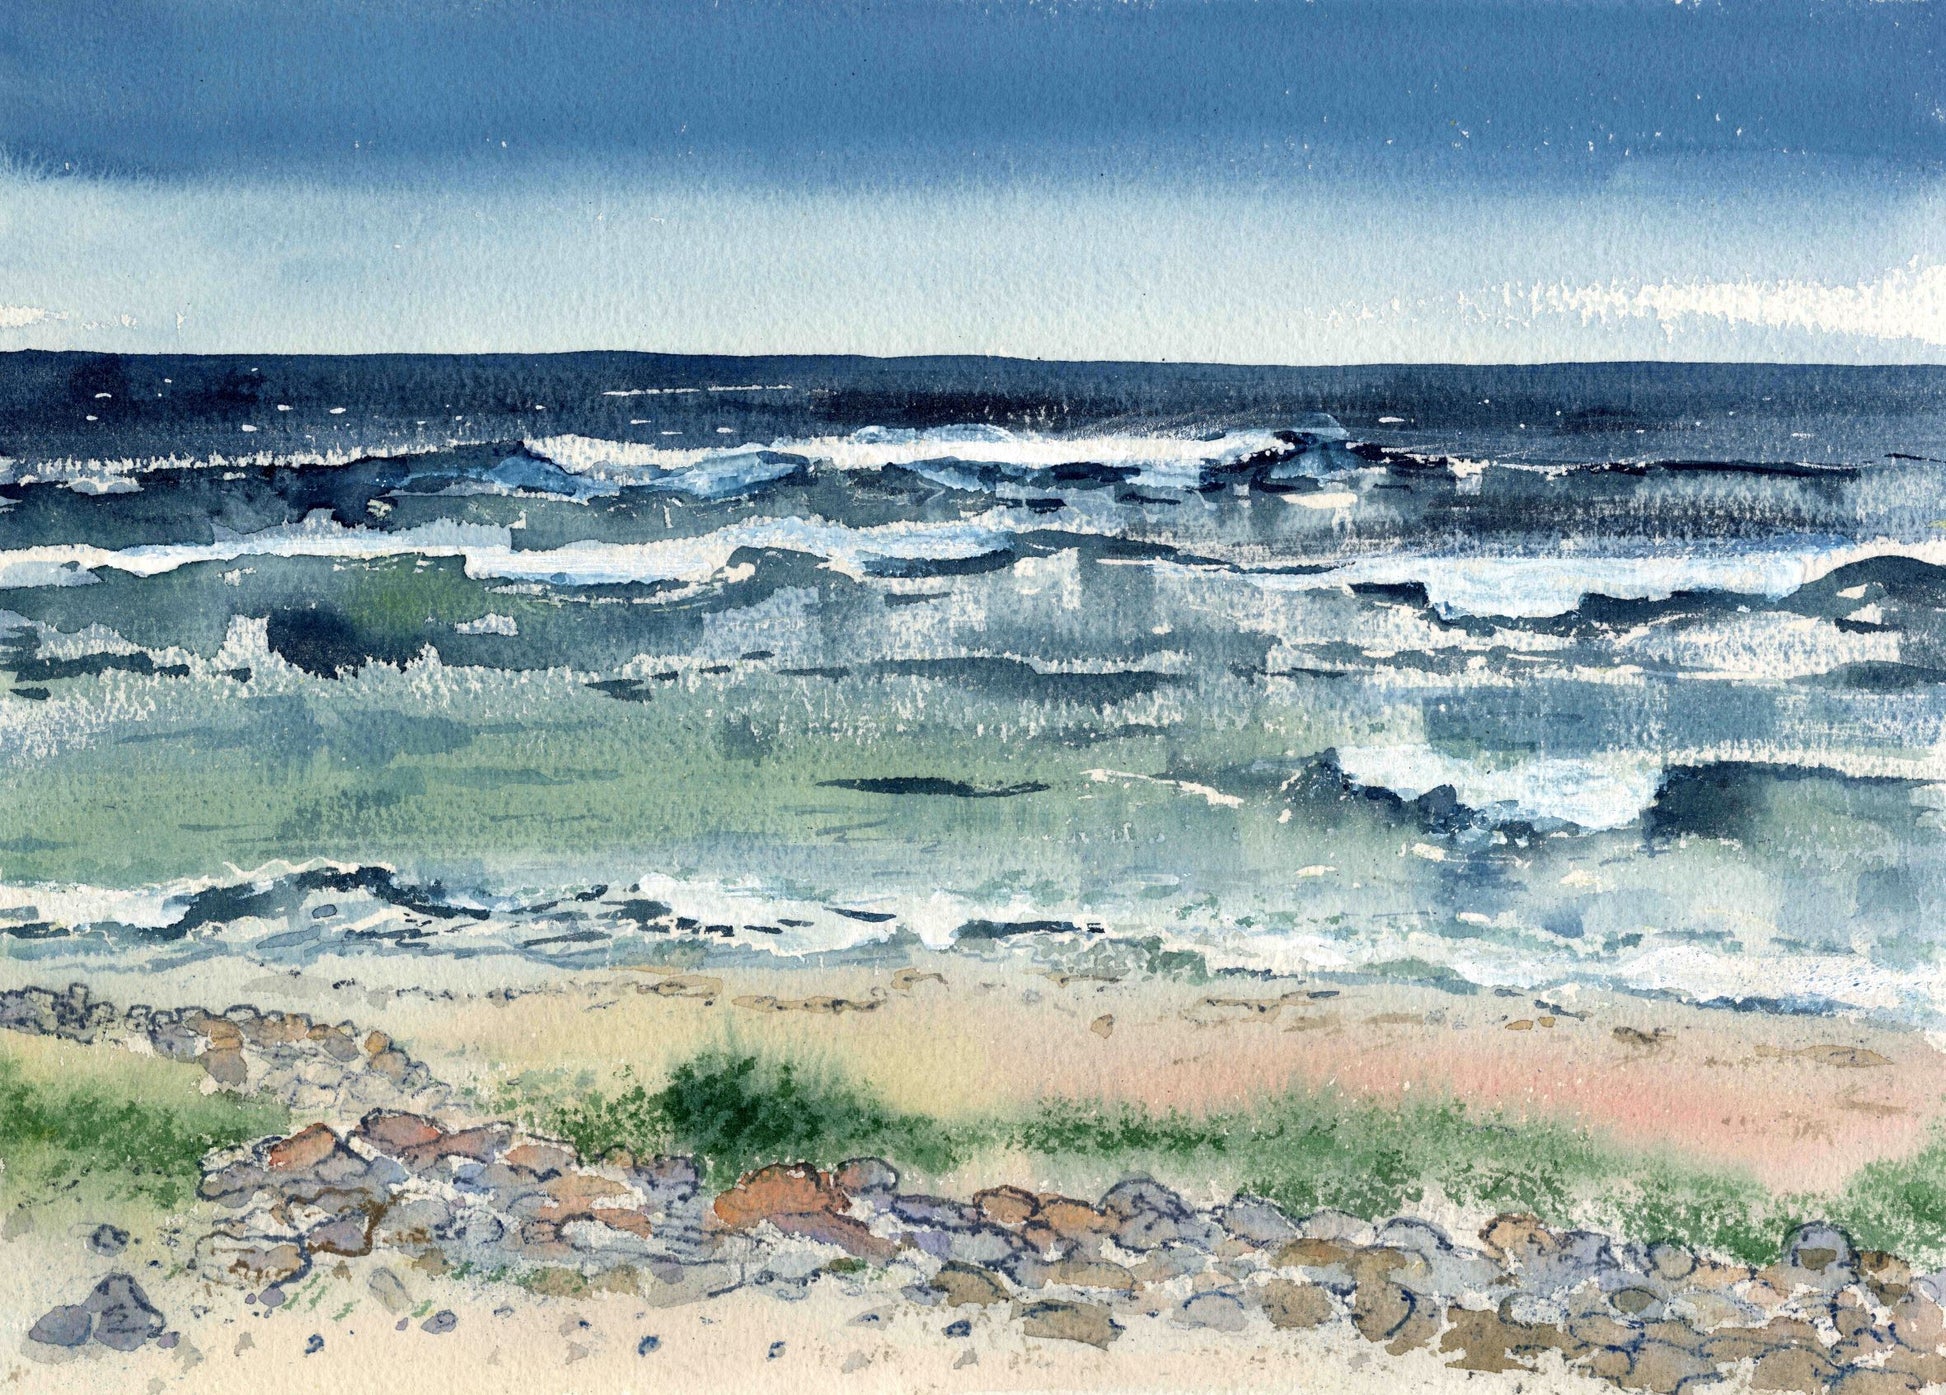 A print on canvas taken from an original watercolour painting of blue waves on the Westray shoreline by artist Jane Glue from Orkney, Scotland